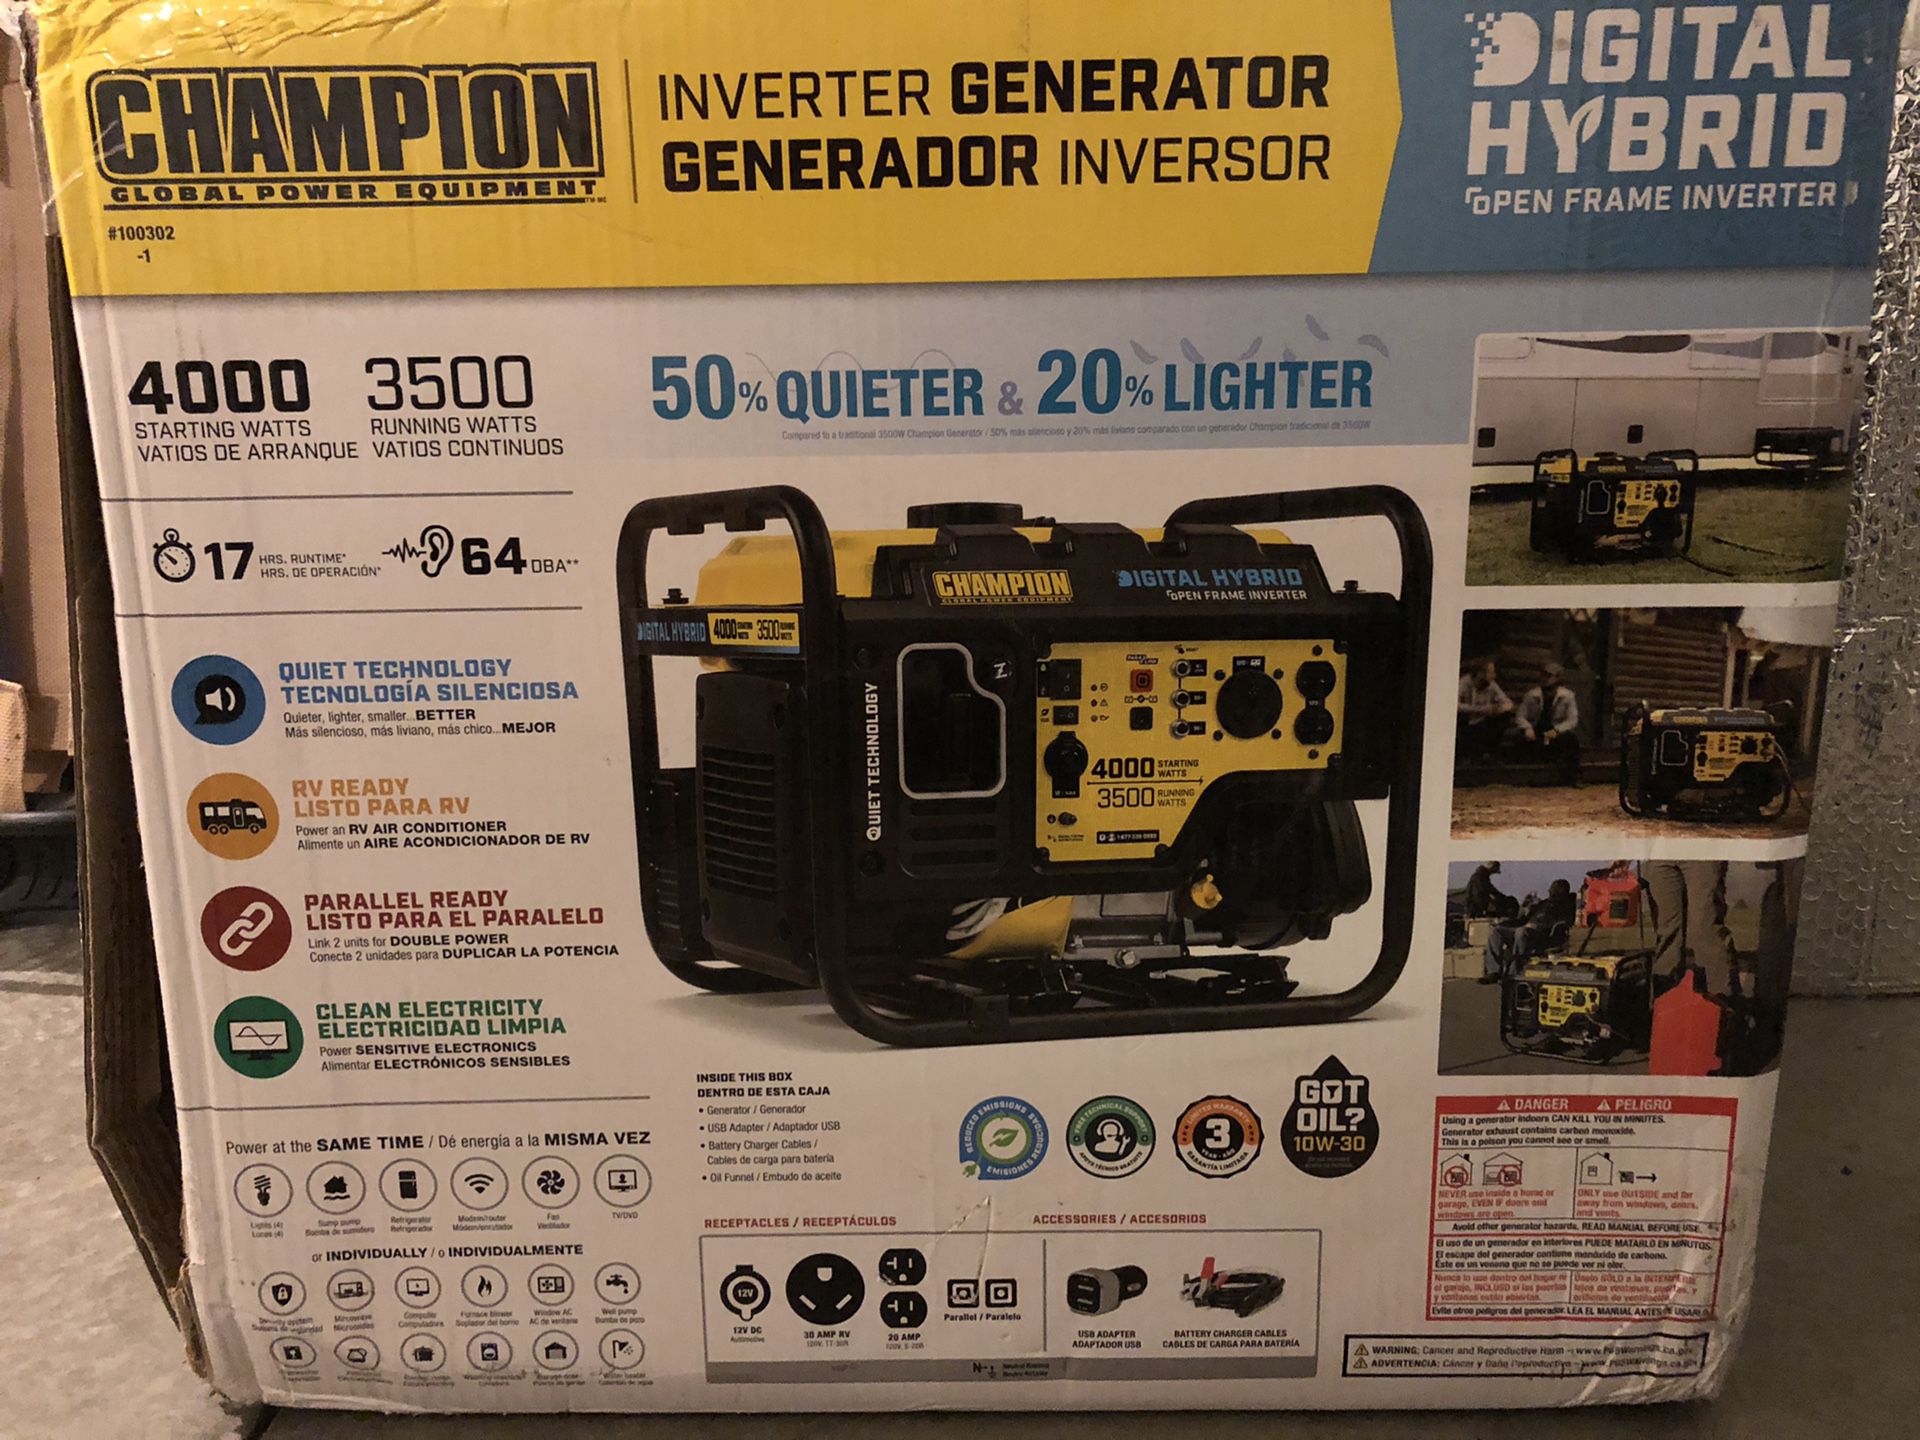 Champion Generator Quite Technology Brand New Used only once Starting Watts 4000 Running Watts 3500